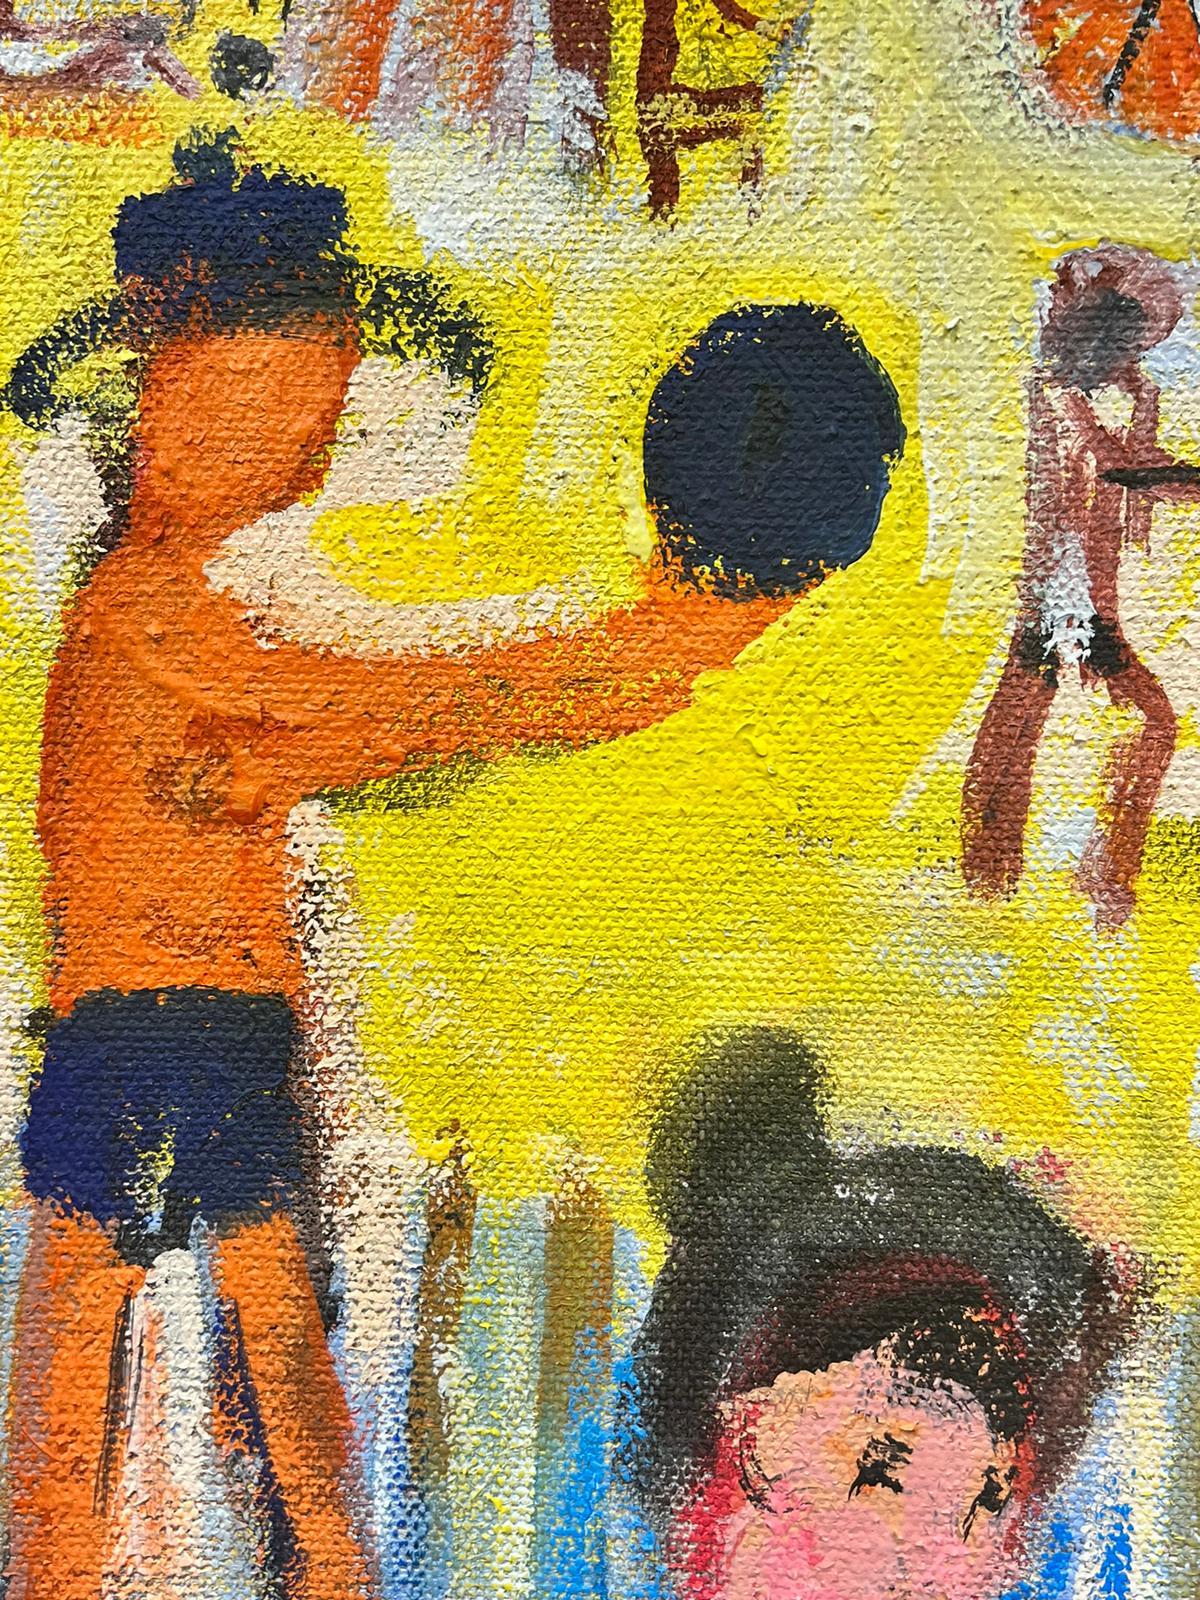 Large French Contemporary Modernist Oil Painting Figures Playing on Sunny Beach For Sale 5